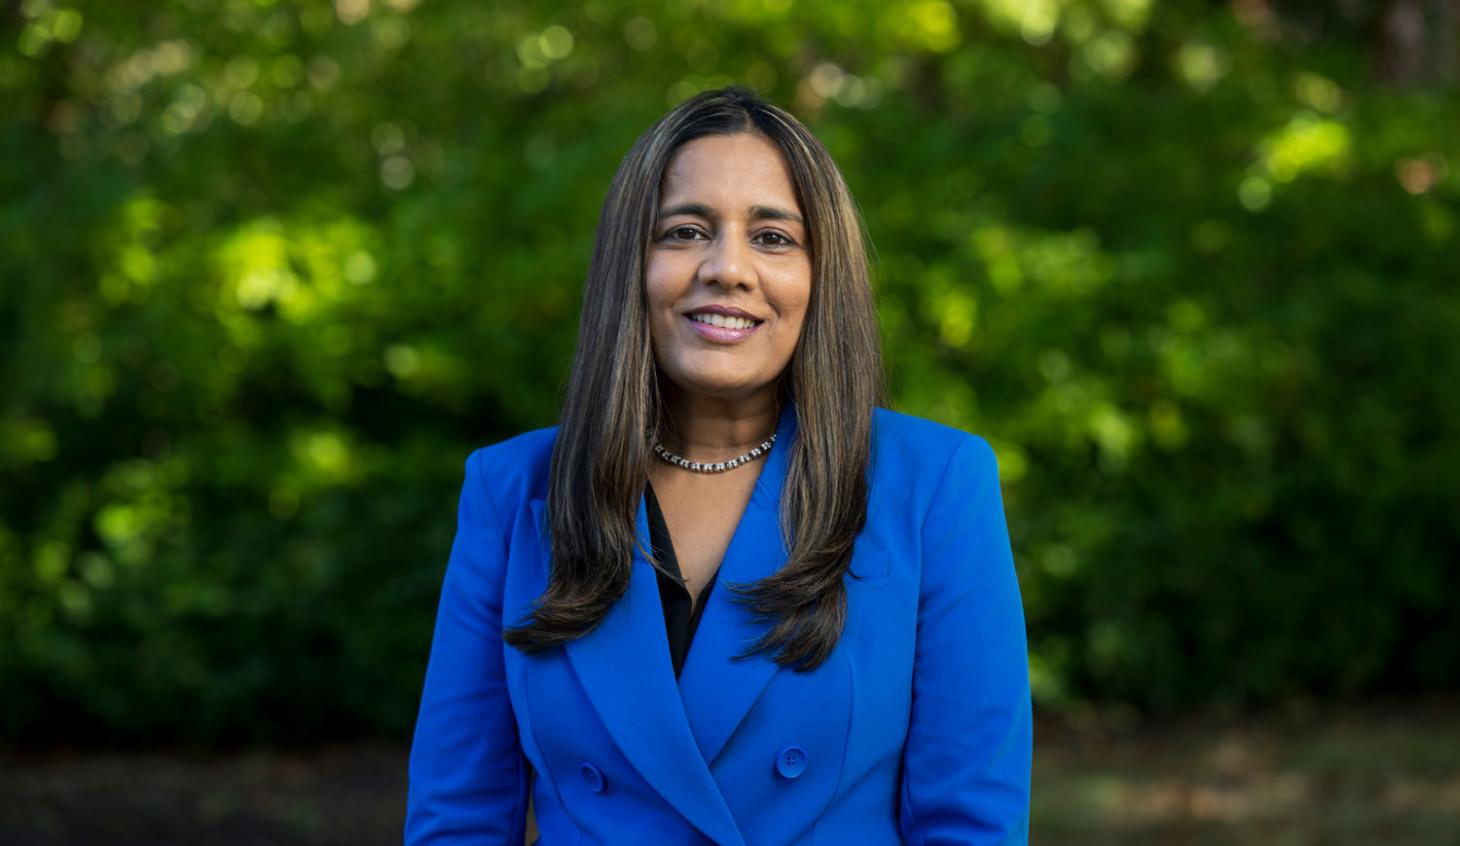 Interim Dean Vrushali Bokil stands in front of bushes on campus in a bright blue suit